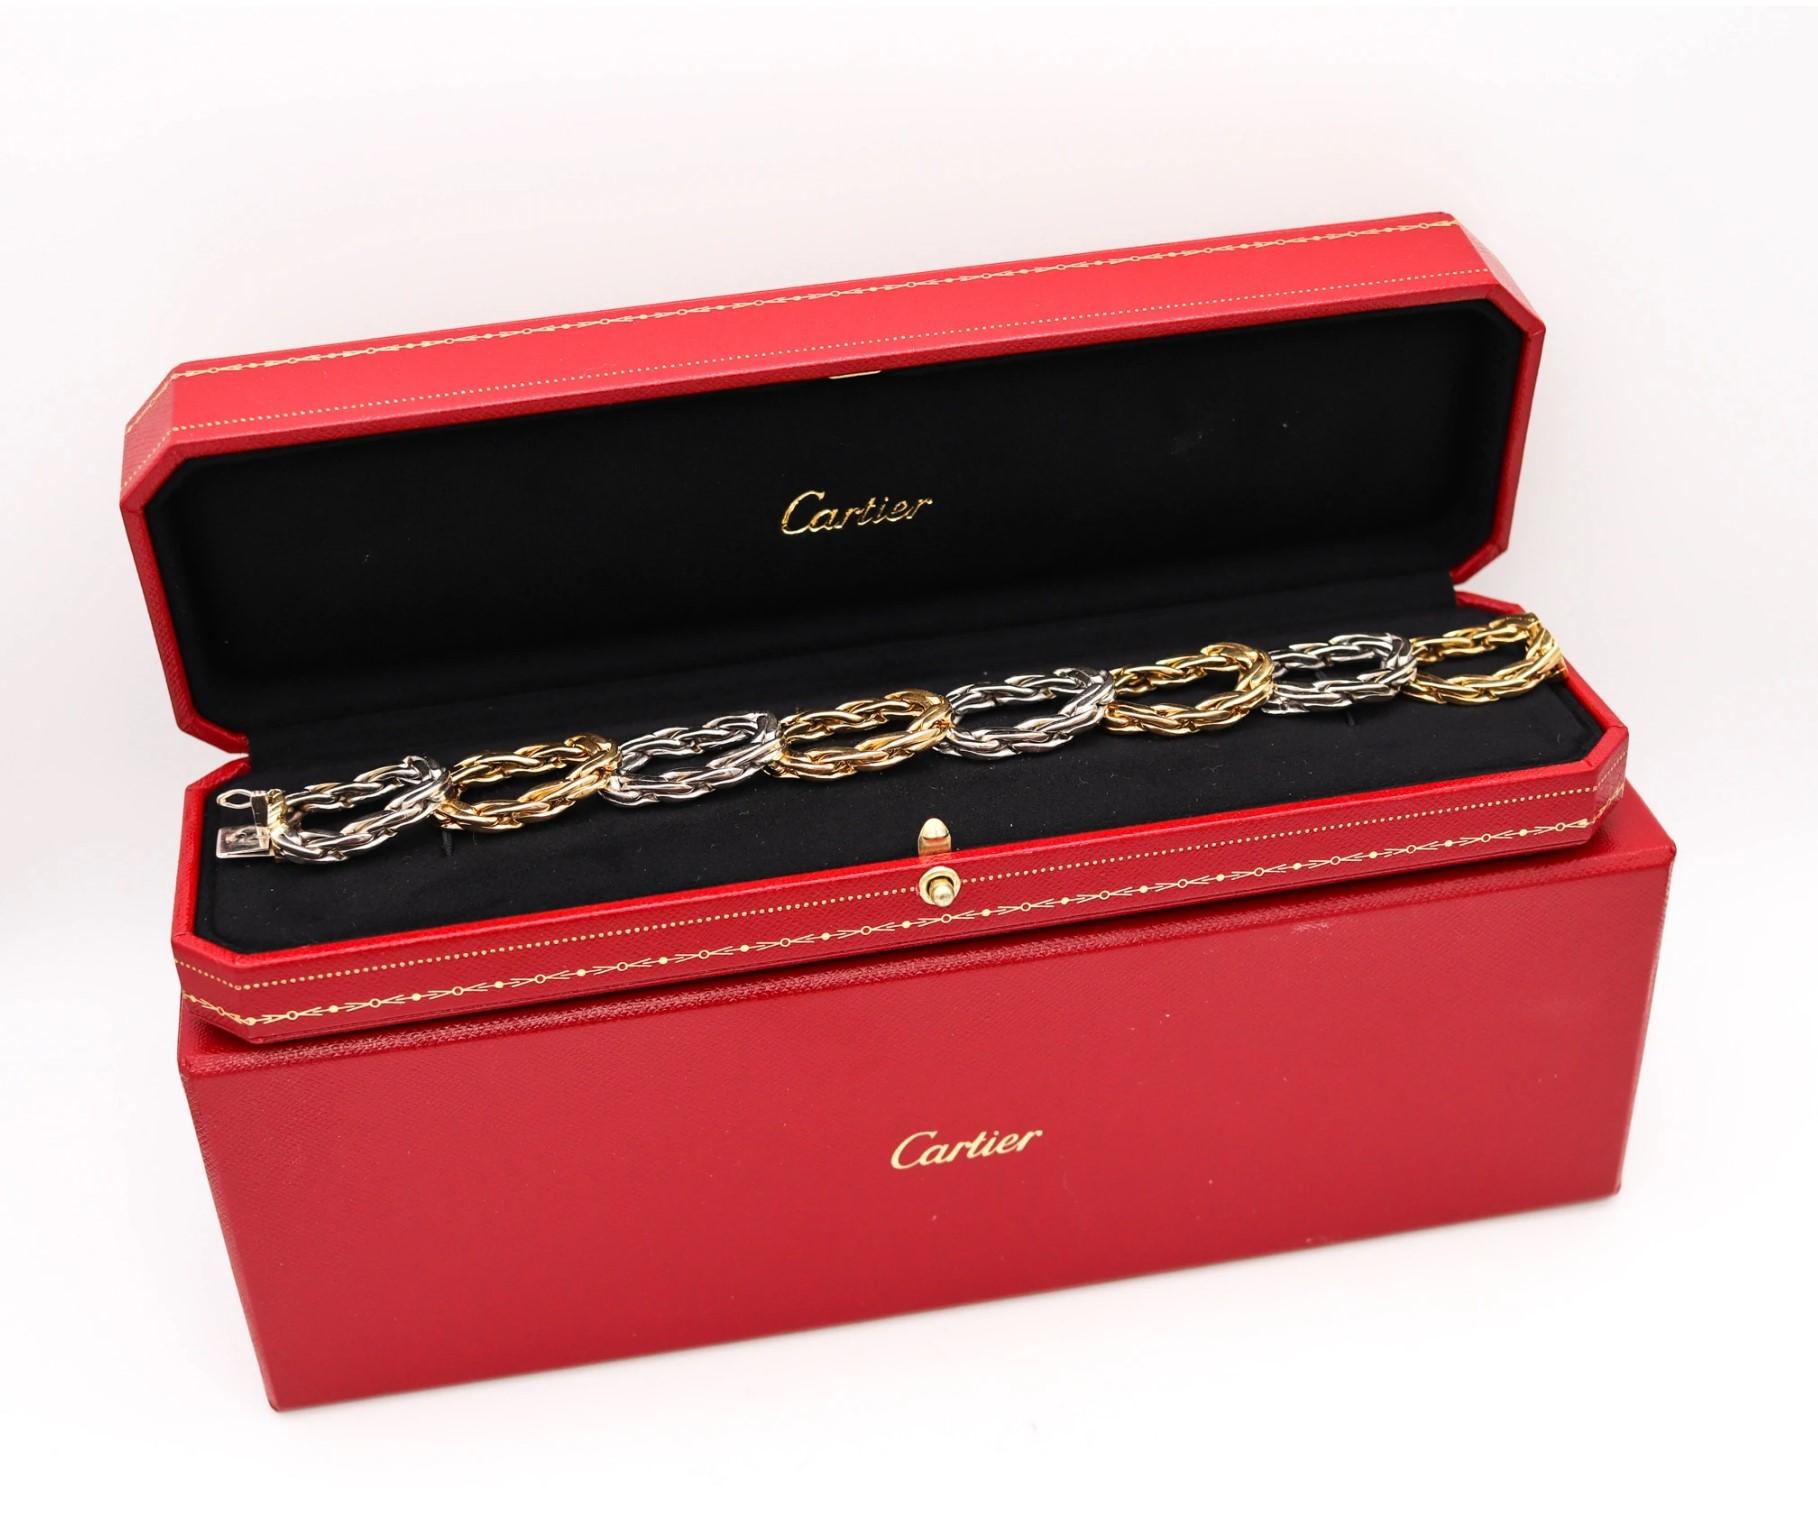 Cartier 1971 London Bracelet With Braided Links In 18Kt Yellow & White Gold For Sale 6